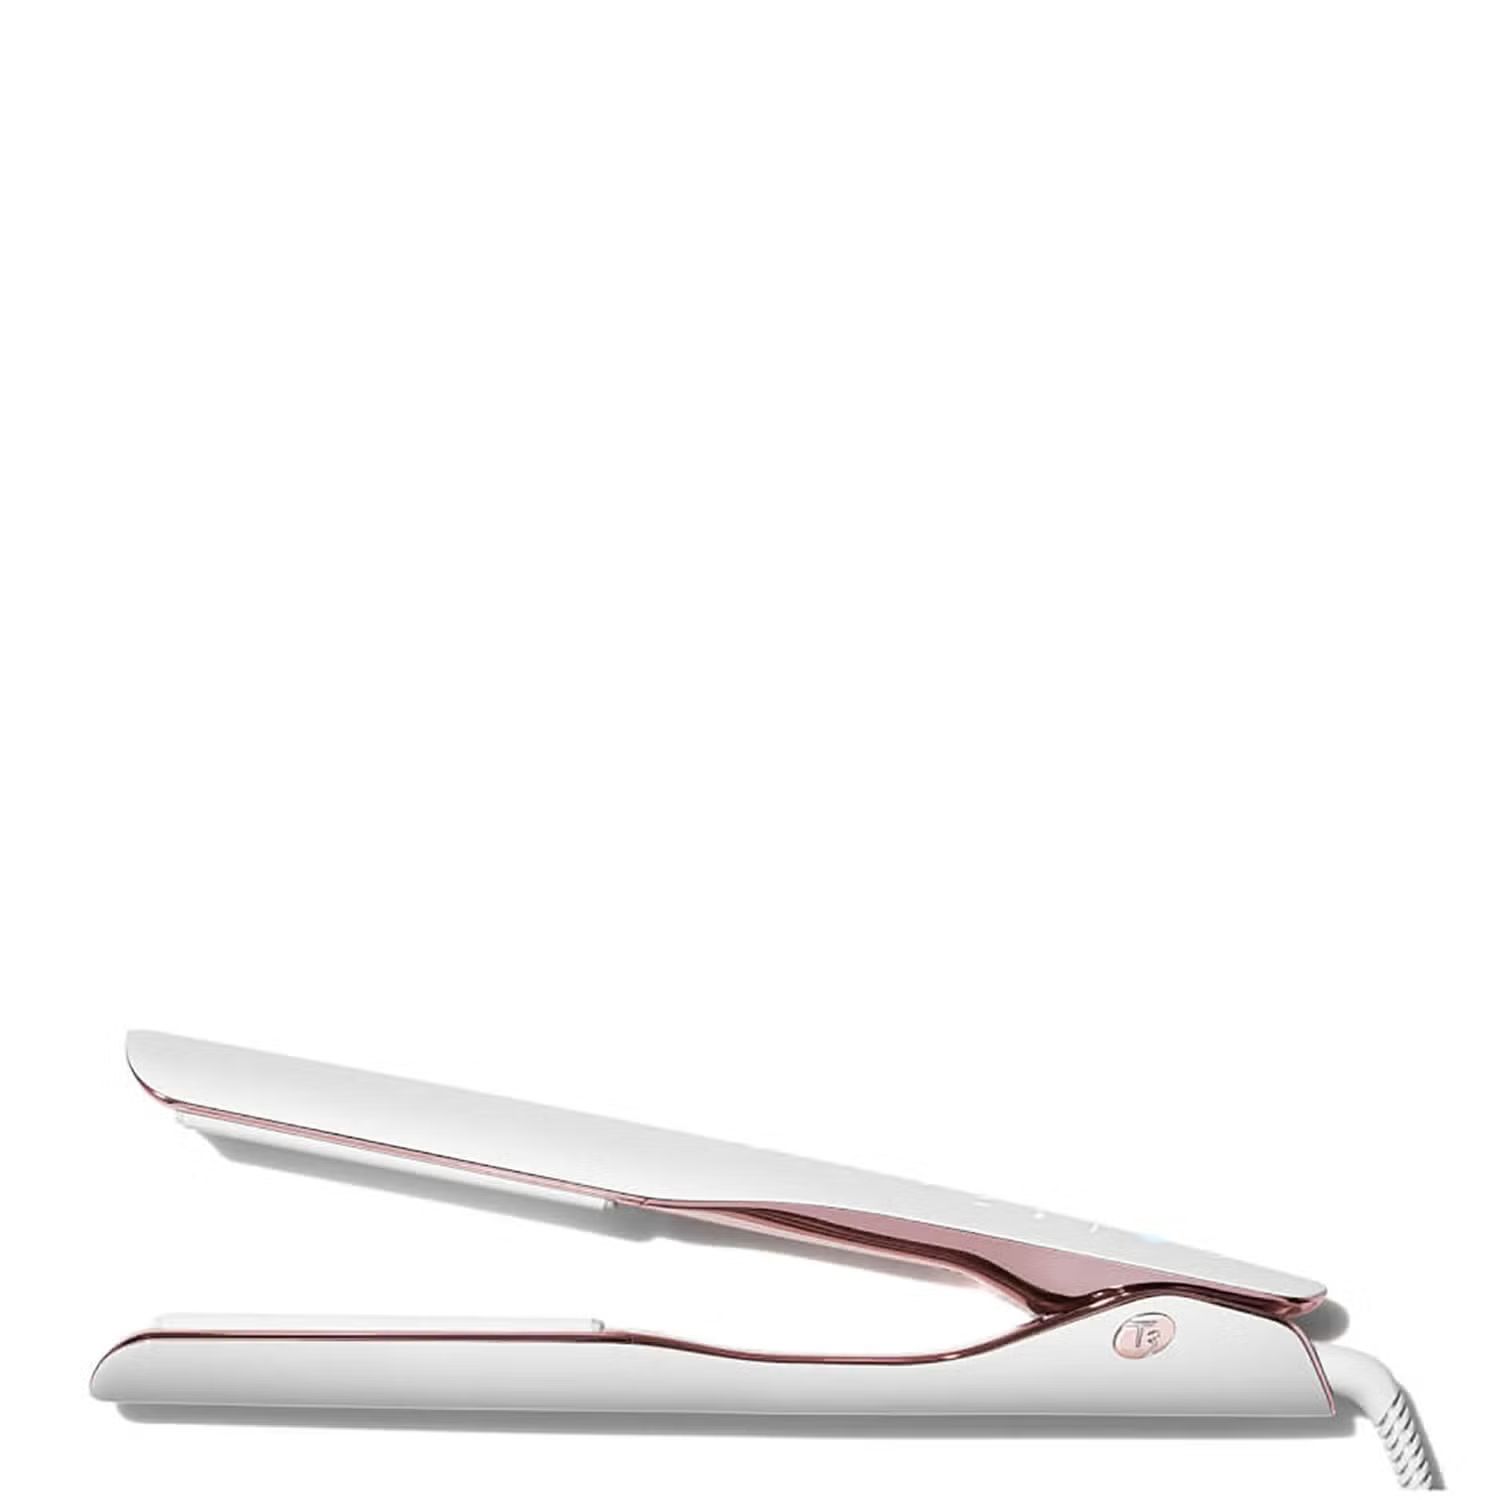 T3 Lucea ID 1" Smart Straightening & Styling Flat Iron with Touch Screen | Skinstore